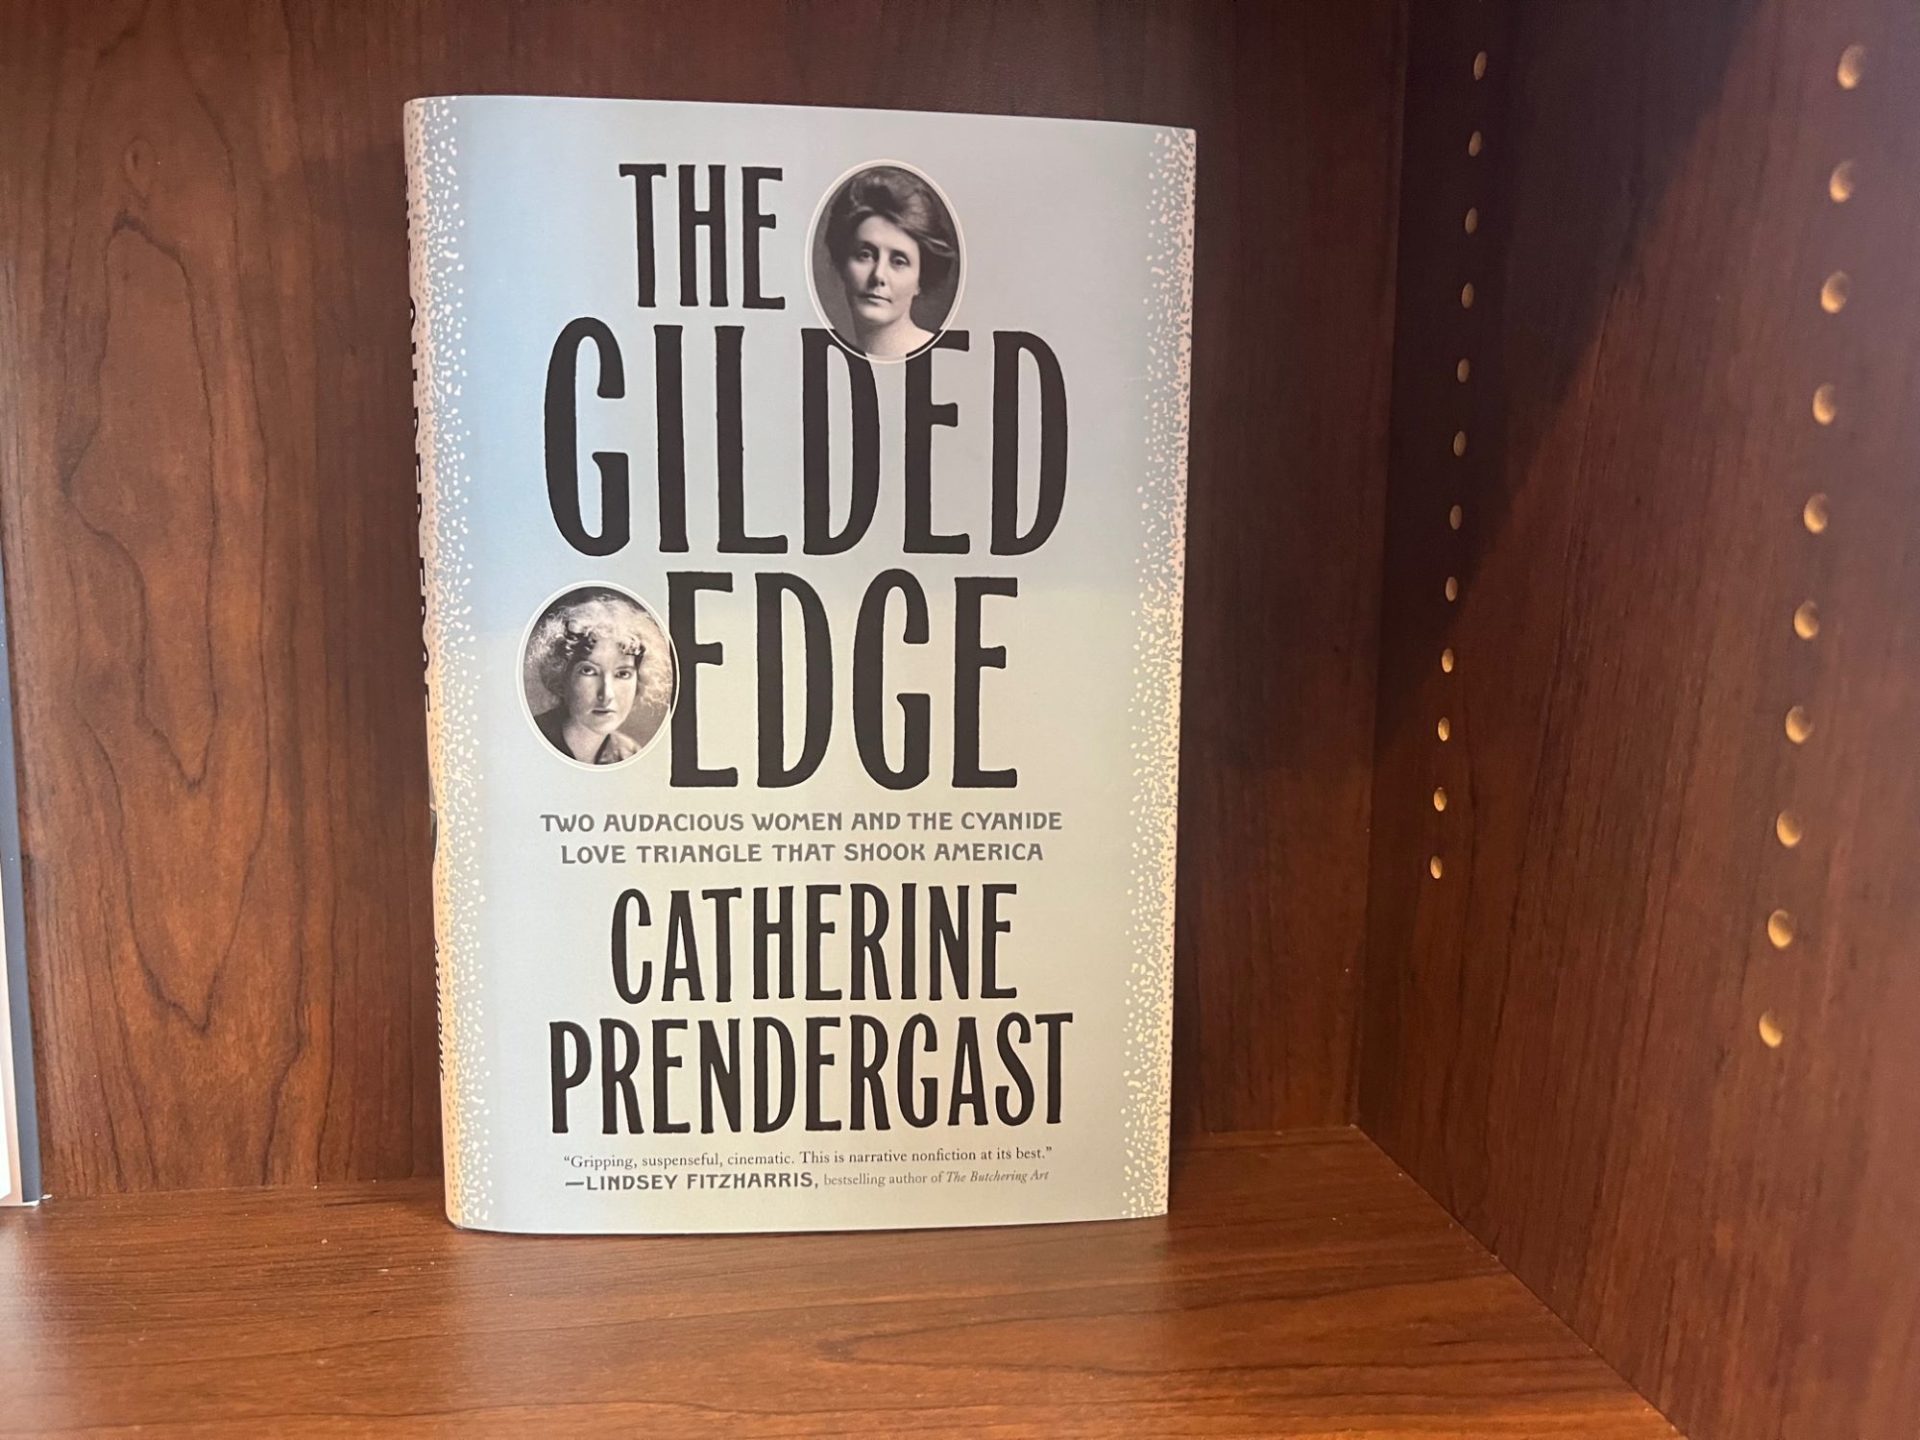 A book with a light gray cover that says The Gilded Edge in black lettering sits on a brown wooden shelf.